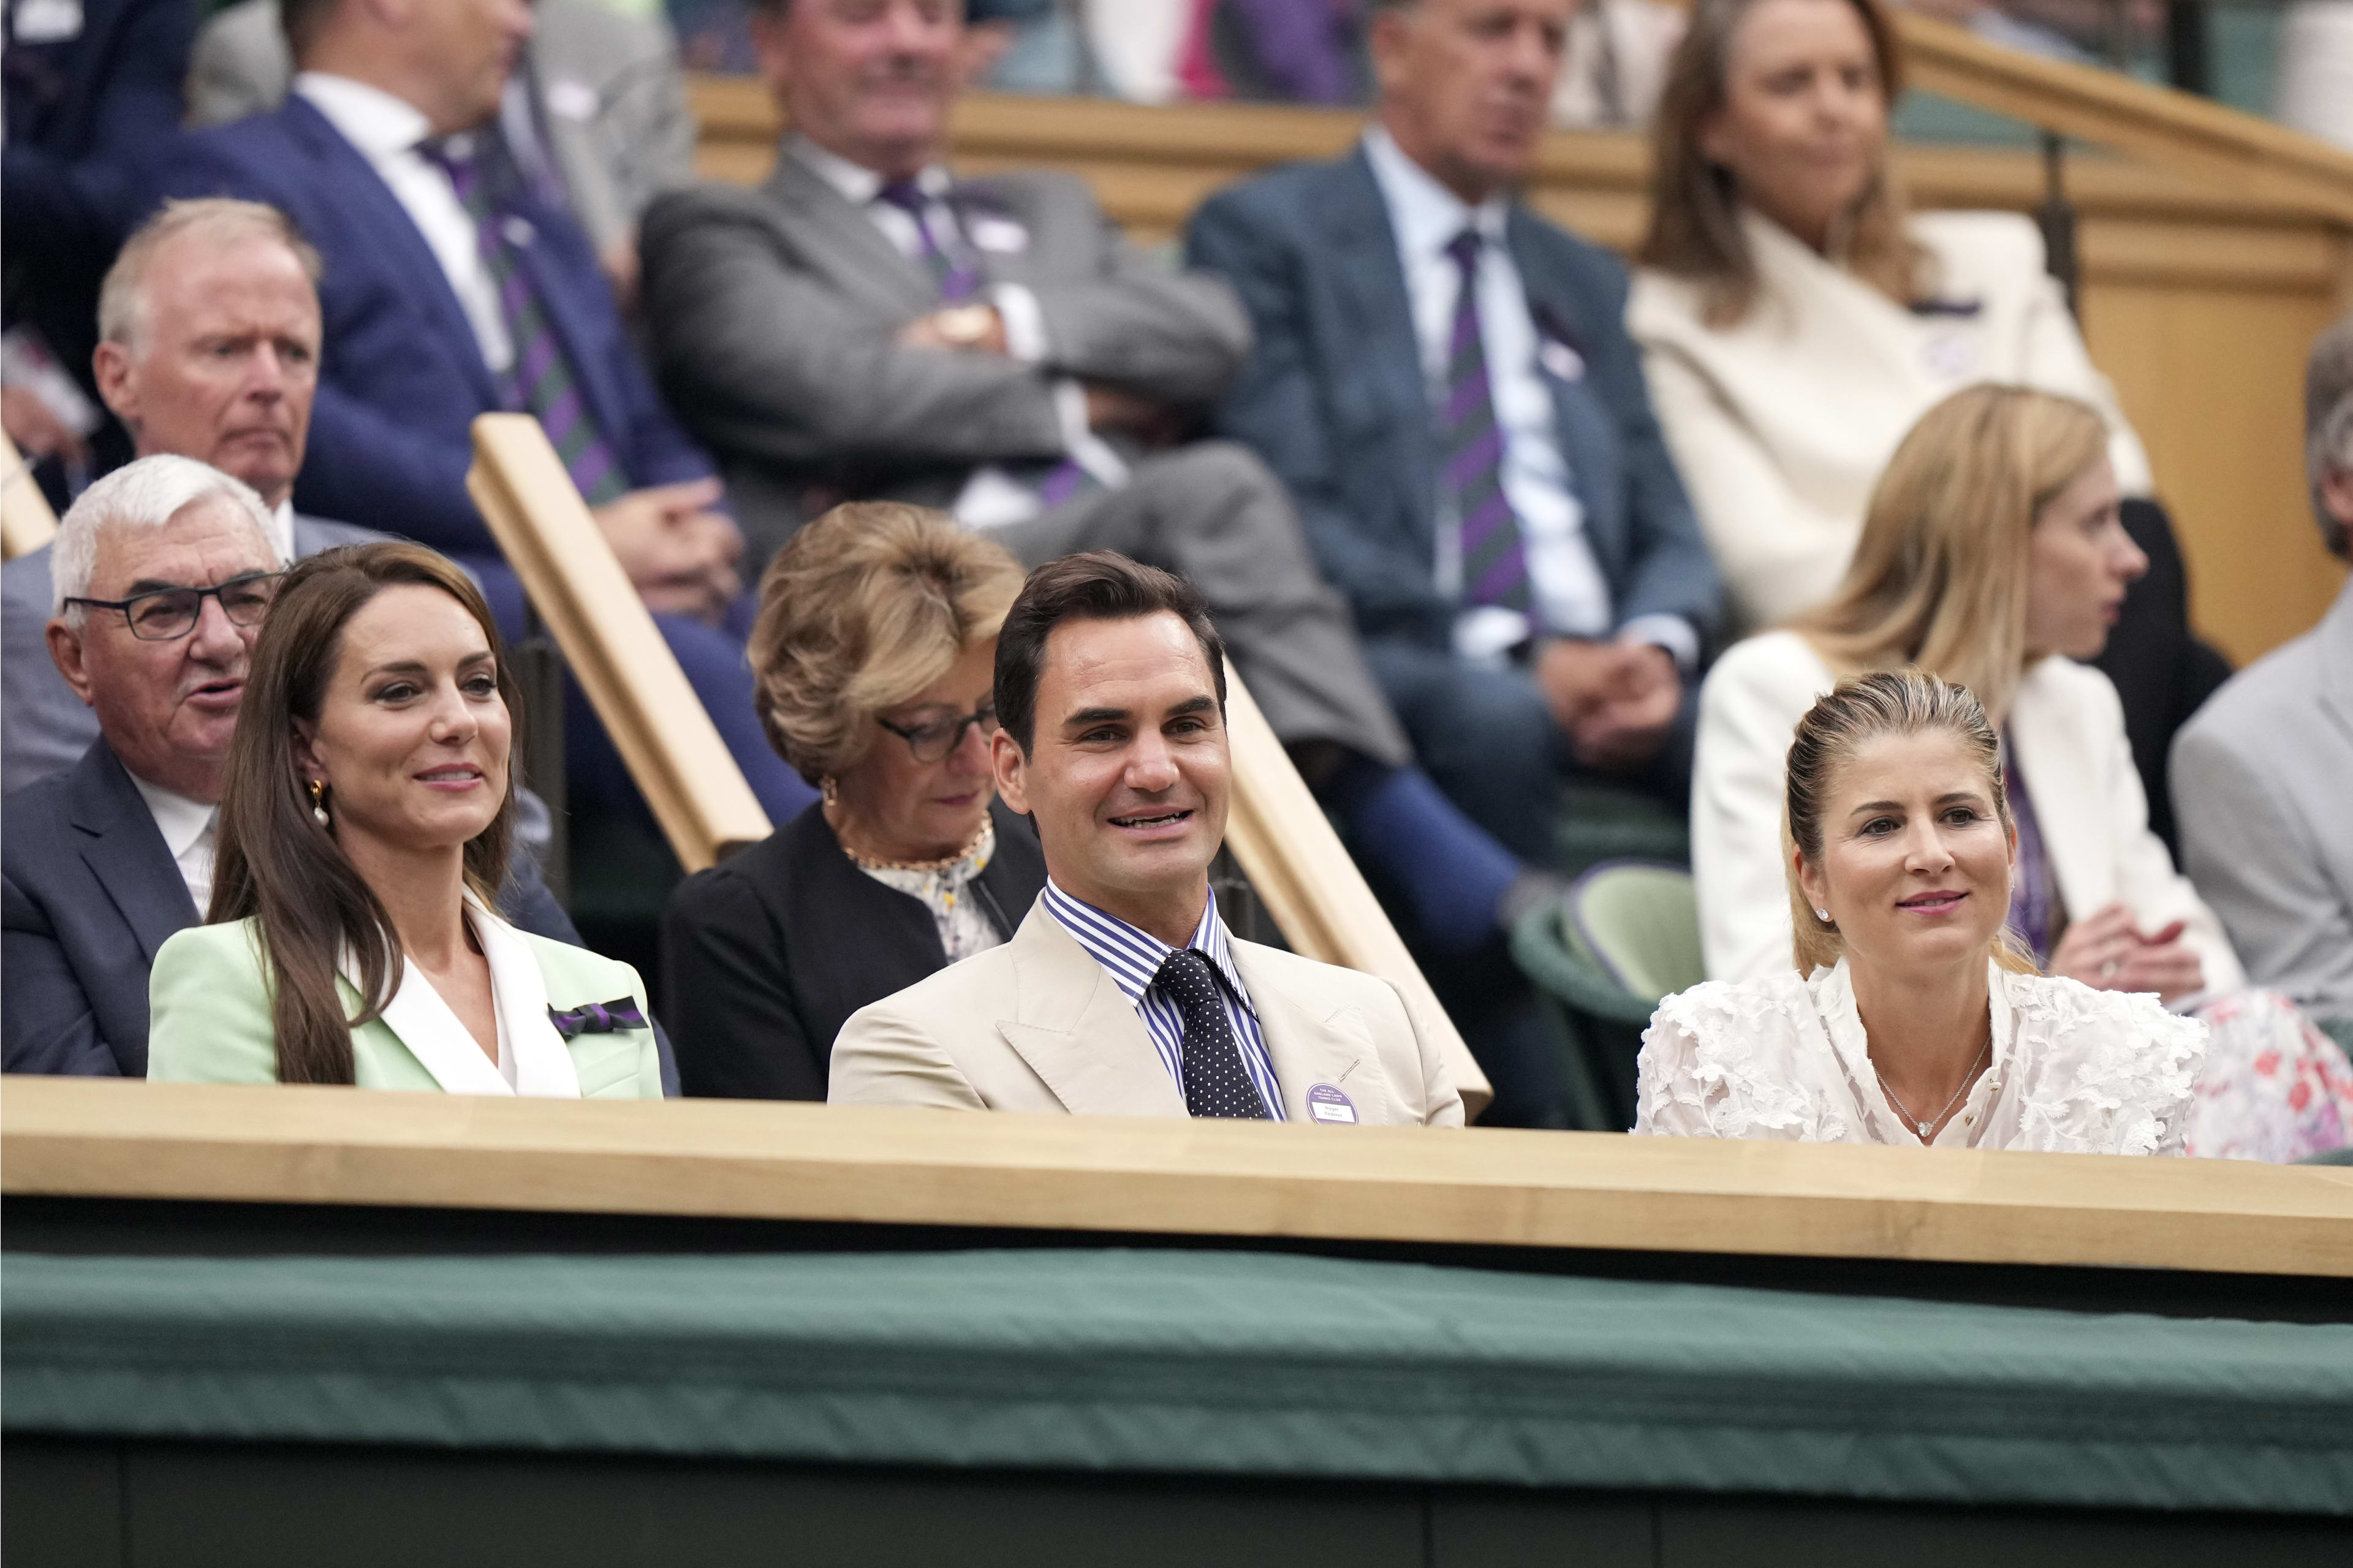 Roger Federer welcomed back to Centre Court for first time since